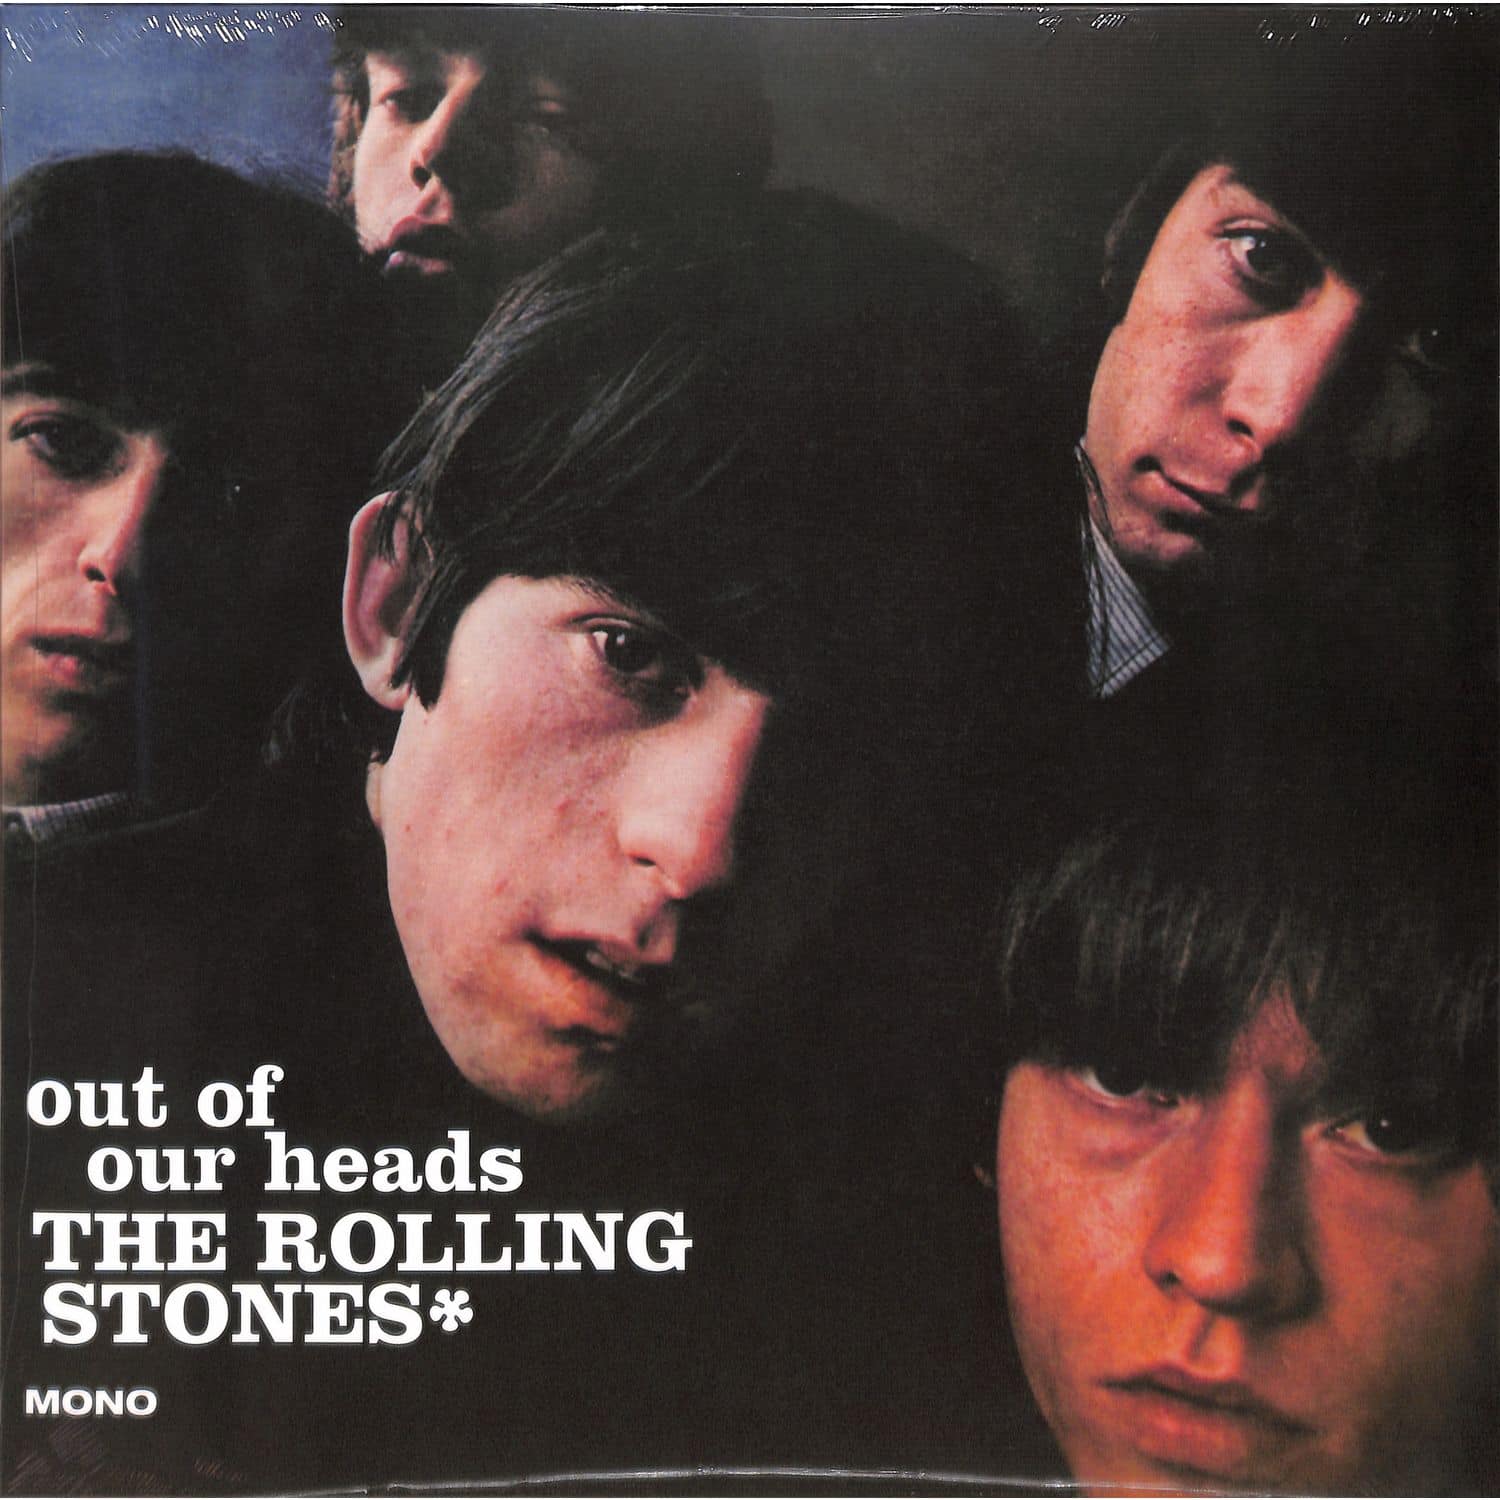 The Rolling Stones - OUT OF OUR HEADS 